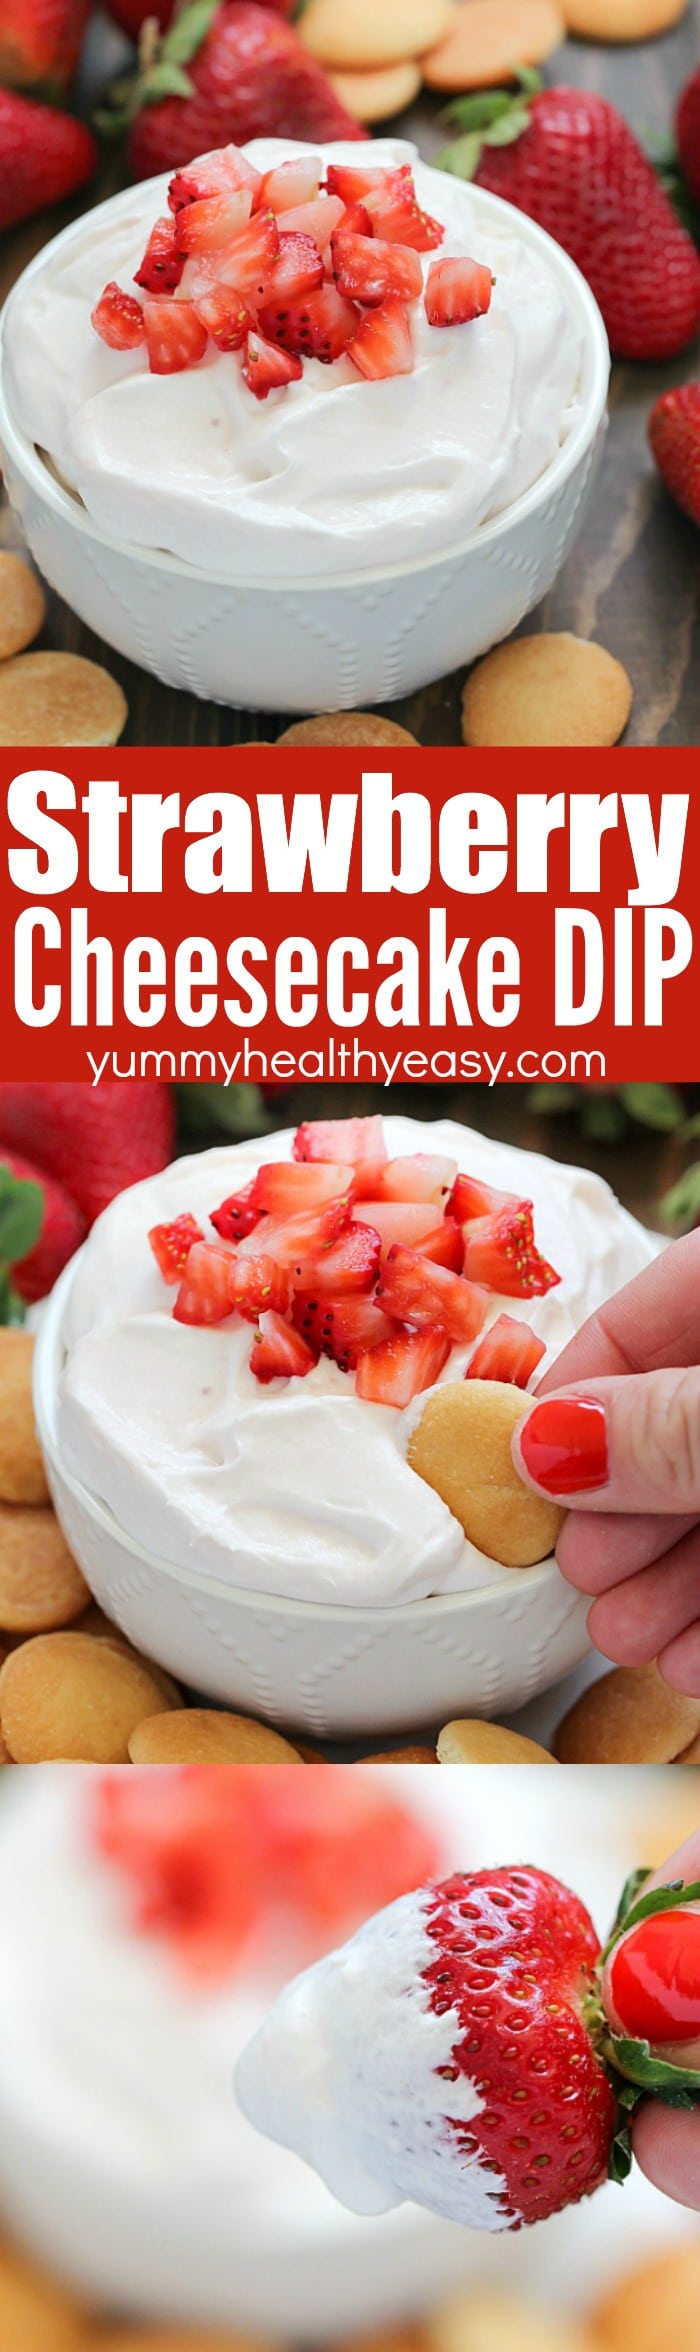 This Strawberry Cheesecake Dip is a creamy fruit dip that's full of strawberry cheesecake flavors but without all the calories of traditional cheesecake! AD via @jennikolaus